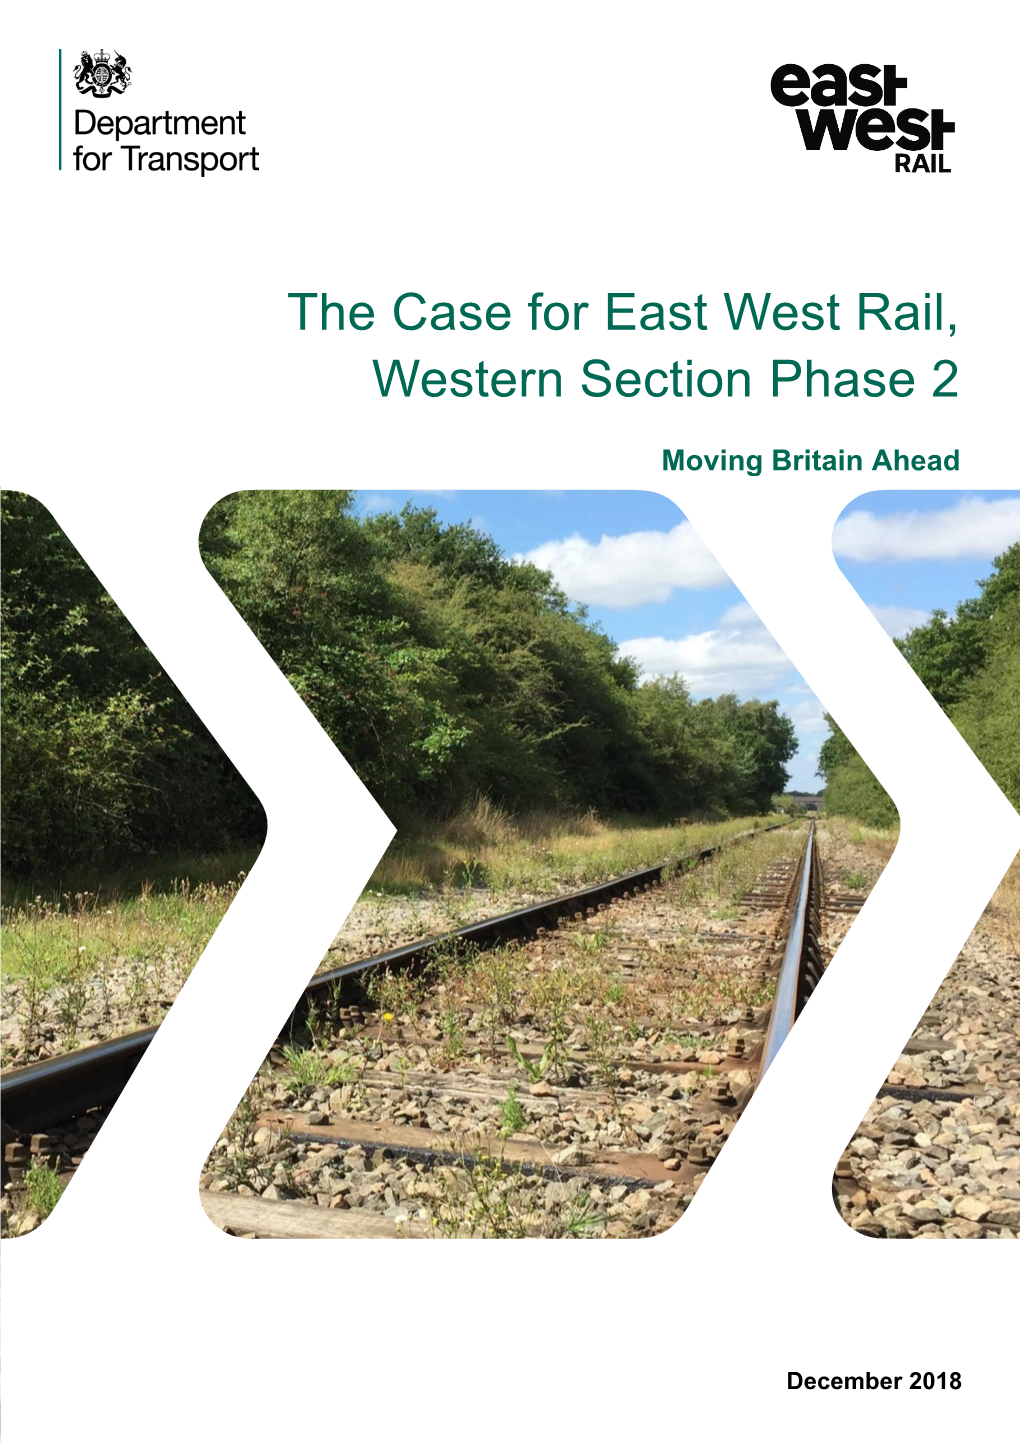 The Case for East West Rail, Western Section Phase 2